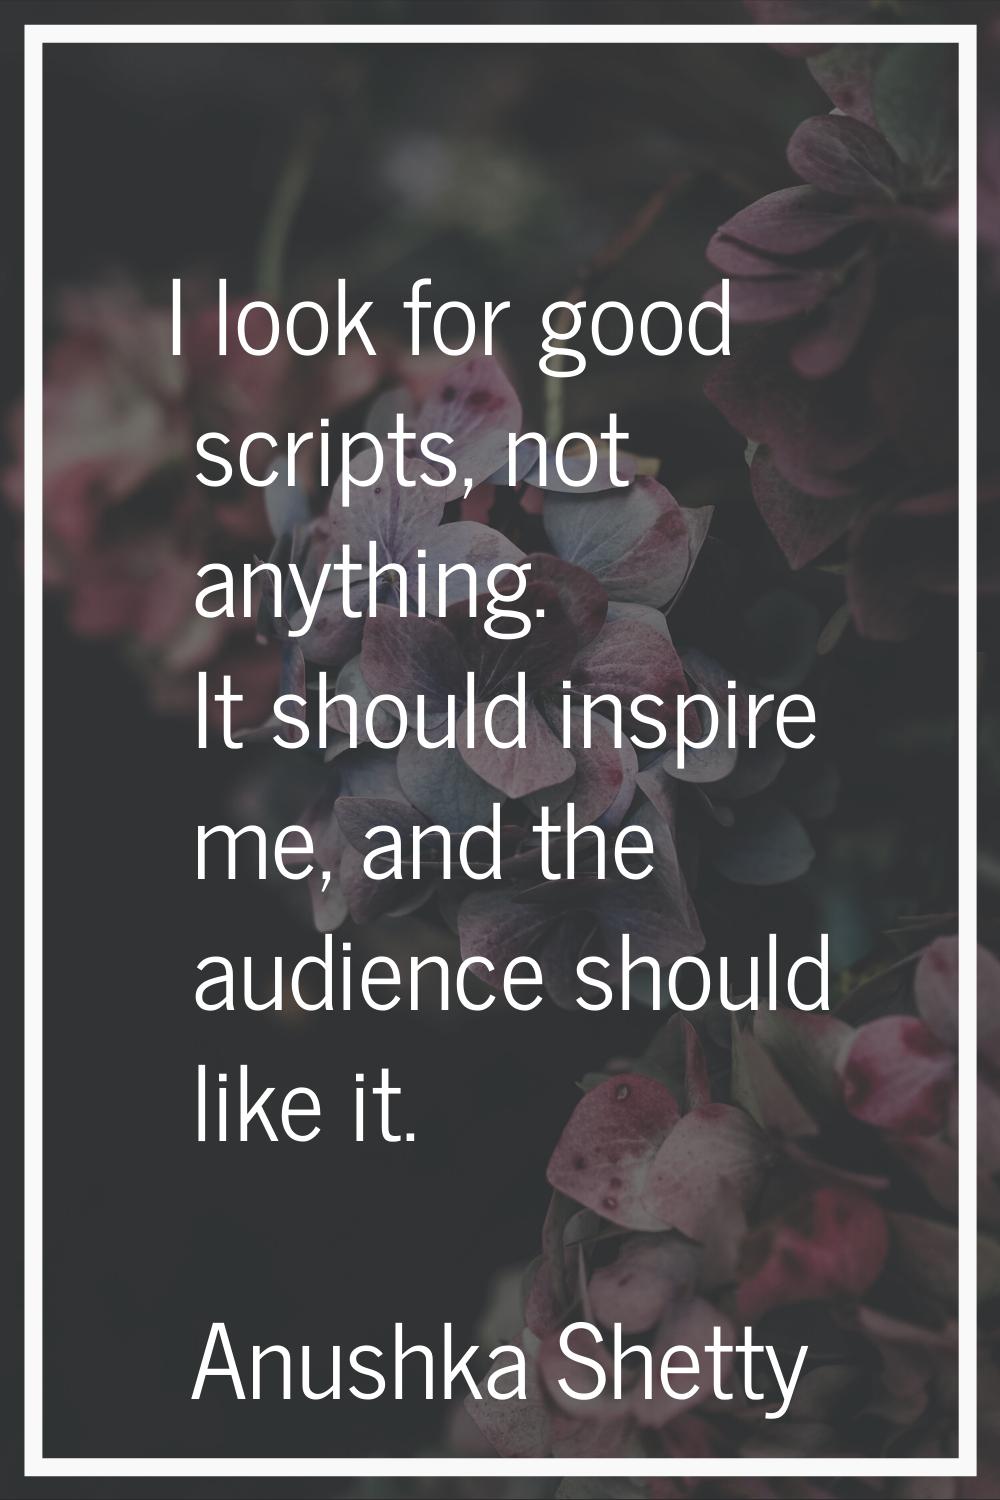 I look for good scripts, not anything. It should inspire me, and the audience should like it.